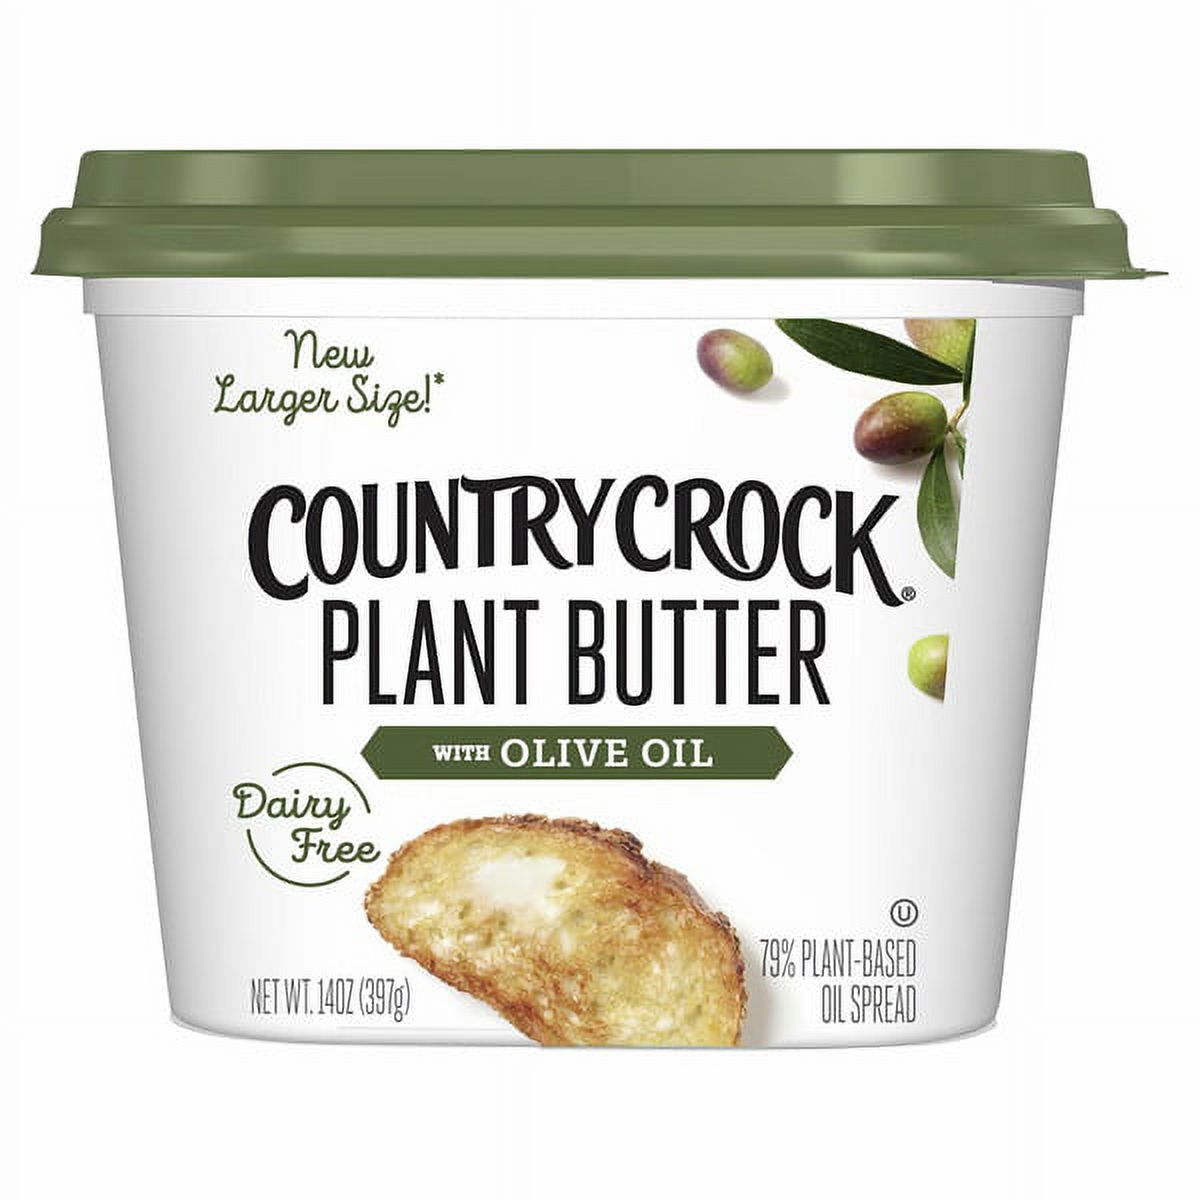 Country Crock Plant Butter with Olive Oil, 14 oz Tub (Refrigerated) - image 1 of 8